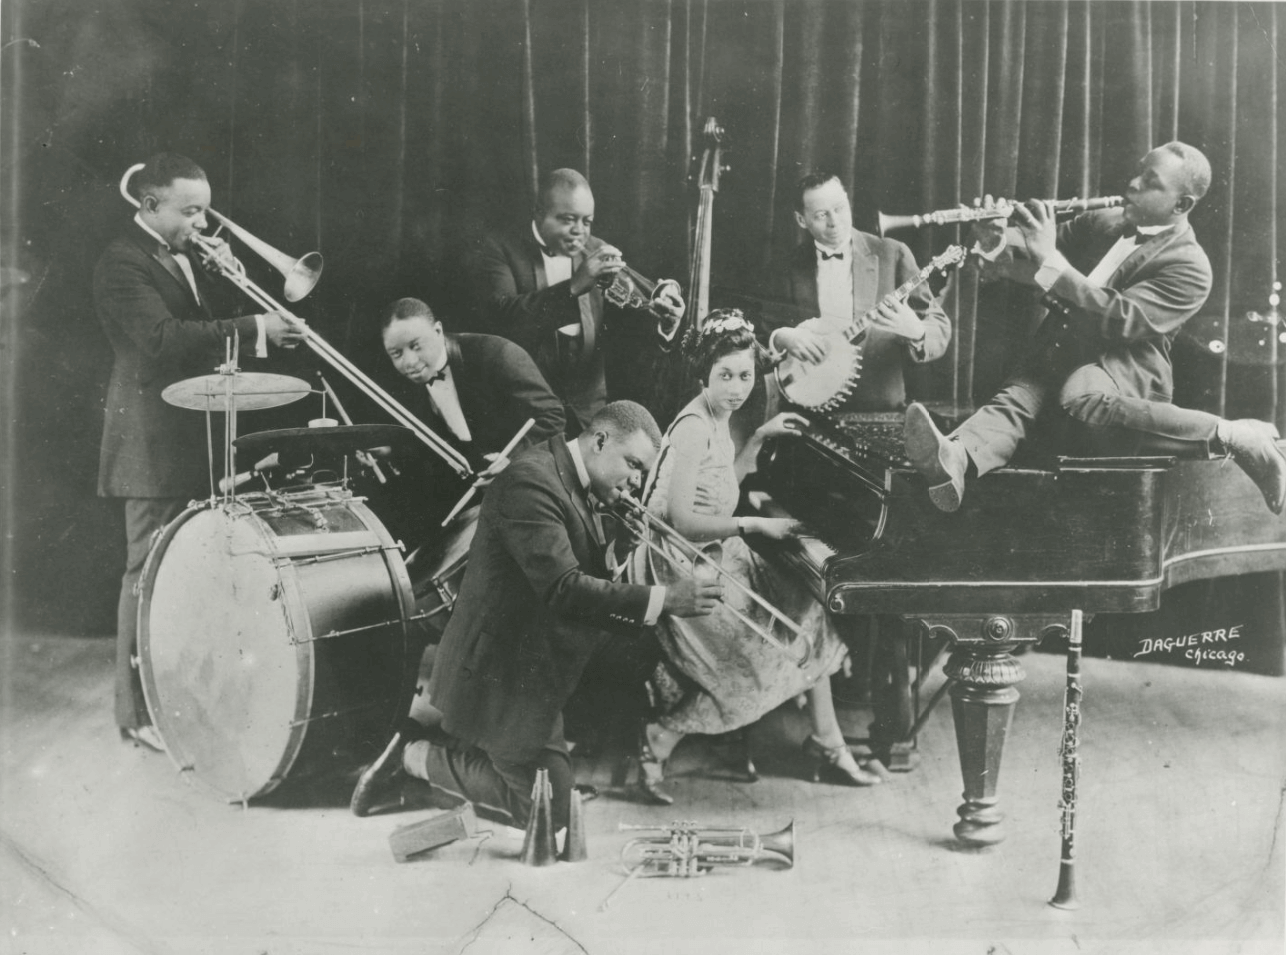 King Oliver's Creole Jazz Band, left to right: Honoré Dutrey, trombone; Warren “Baby” Dodds, drums; “King” Joe Oliver, cornet; Louis Armstrong (kneeling in front), slide trumpet; Lil Hardin Armstrong, piano; Bill Johnson, banjo/bass; Johnny Dodds, clarinet. Photo: Hogan Jazz Archive Photography Collection, Tulane University Libraries